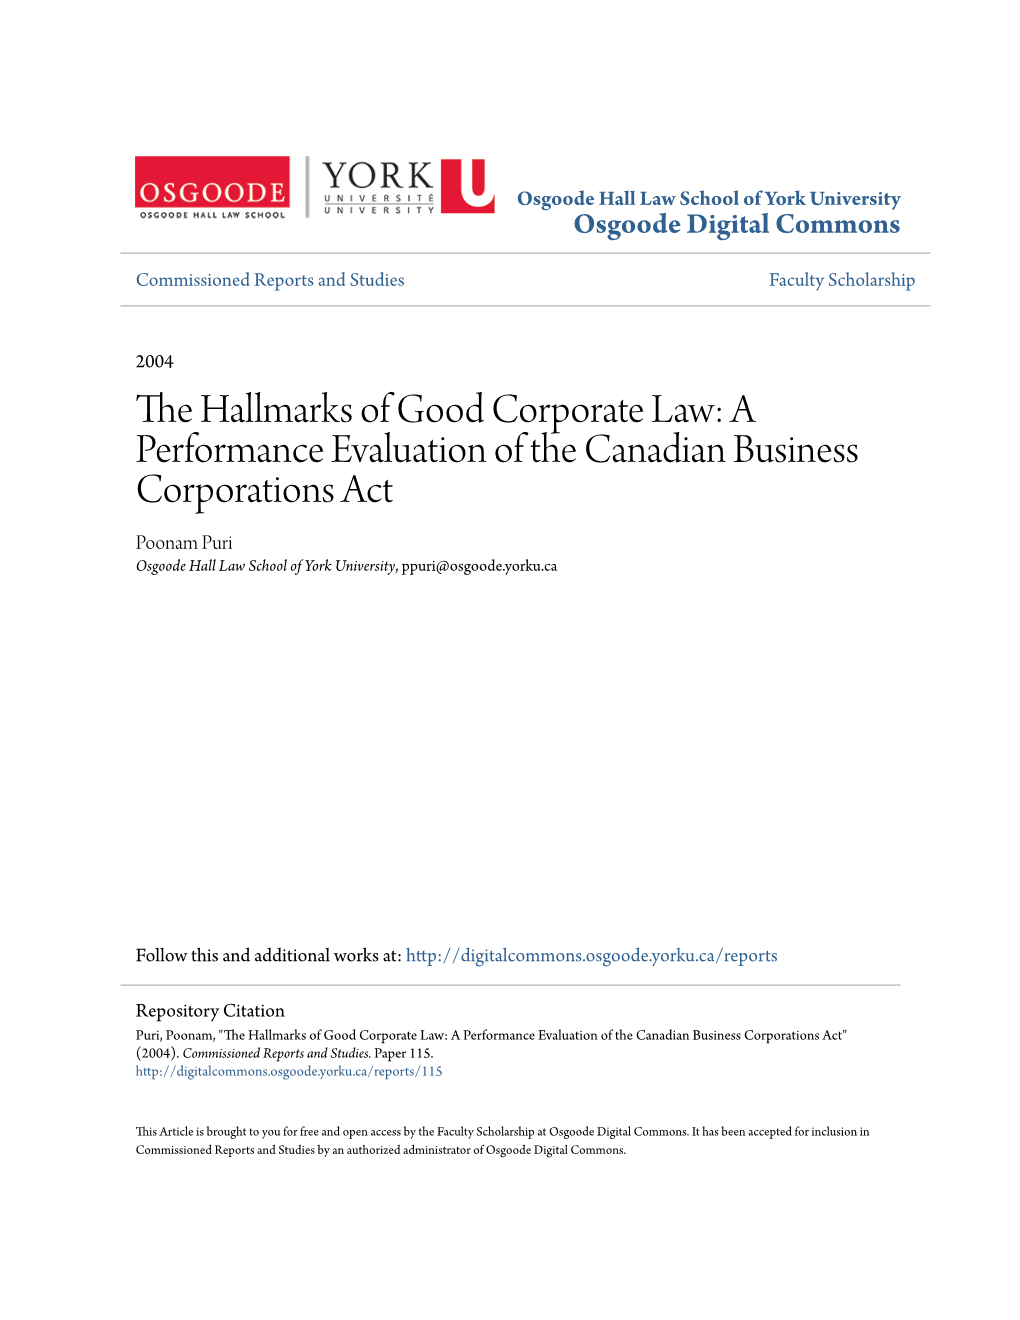 A Performance Evaluation of the Canadian Business Corporations Act Poonam Puri Osgoode Hall Law School of York University, Ppuri@Osgoode.Yorku.Ca